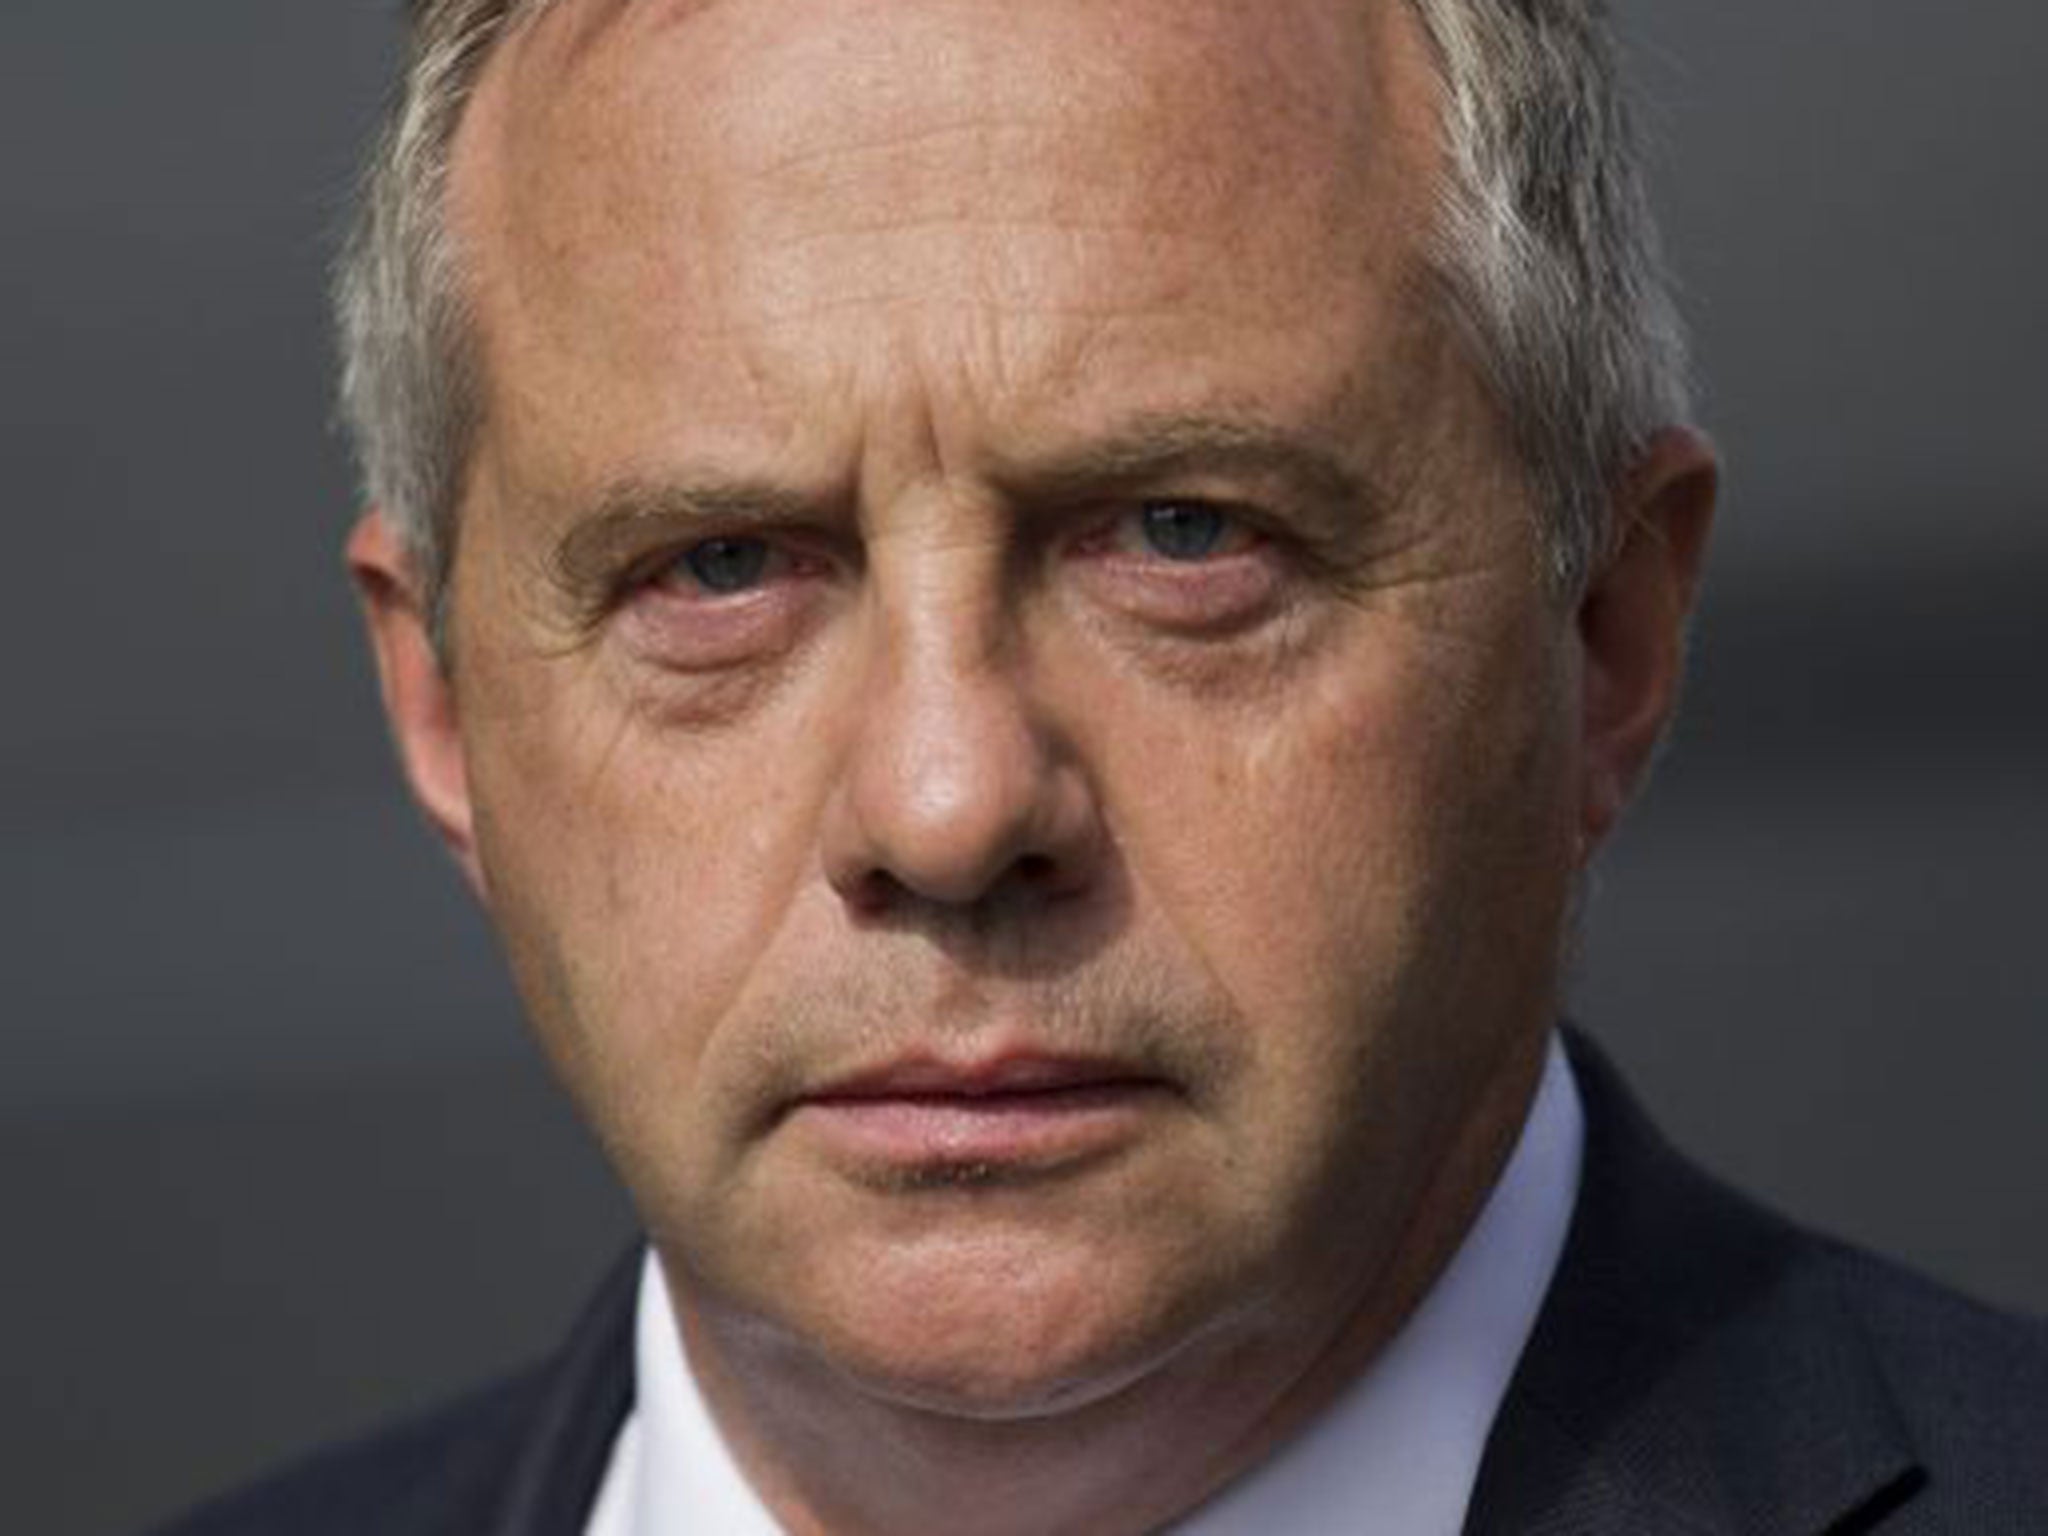 John Mann opposes new rules which allow MPs same rights as citizens when arrested